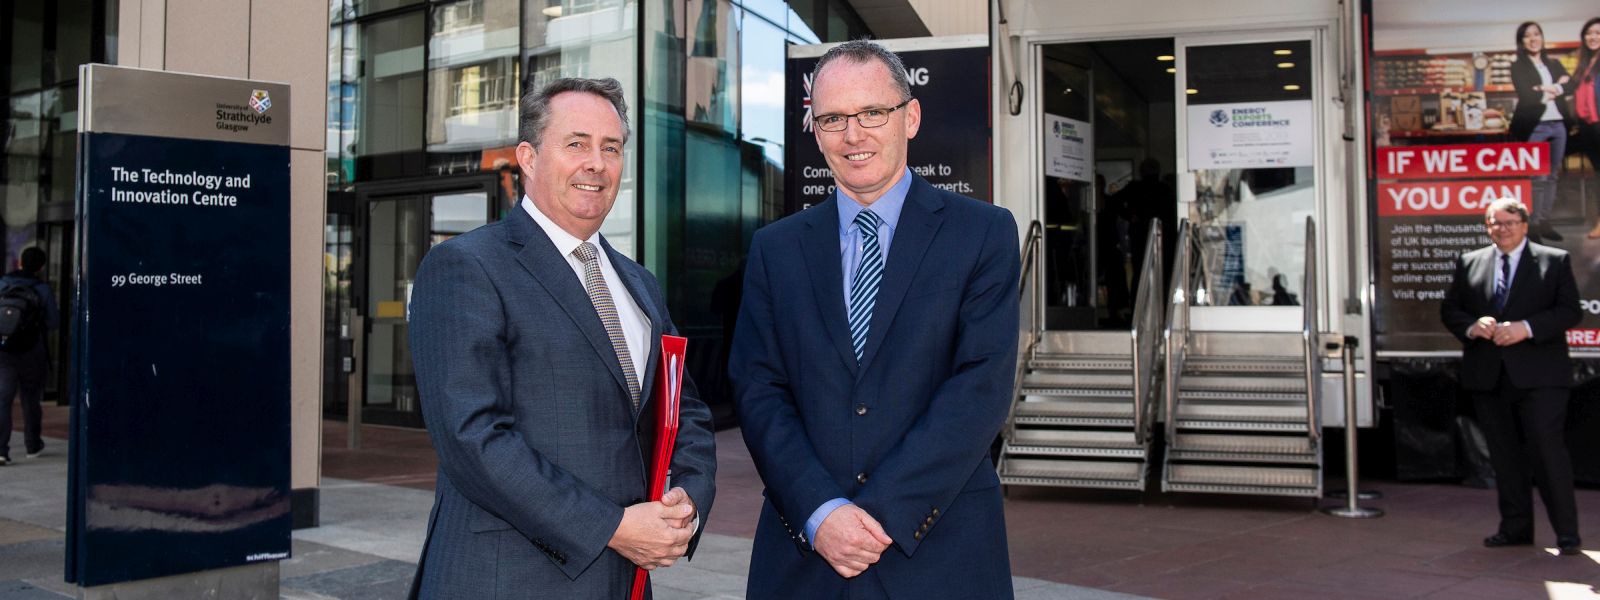 Strathclyde University helps promote exporting opportunities in the energy sector